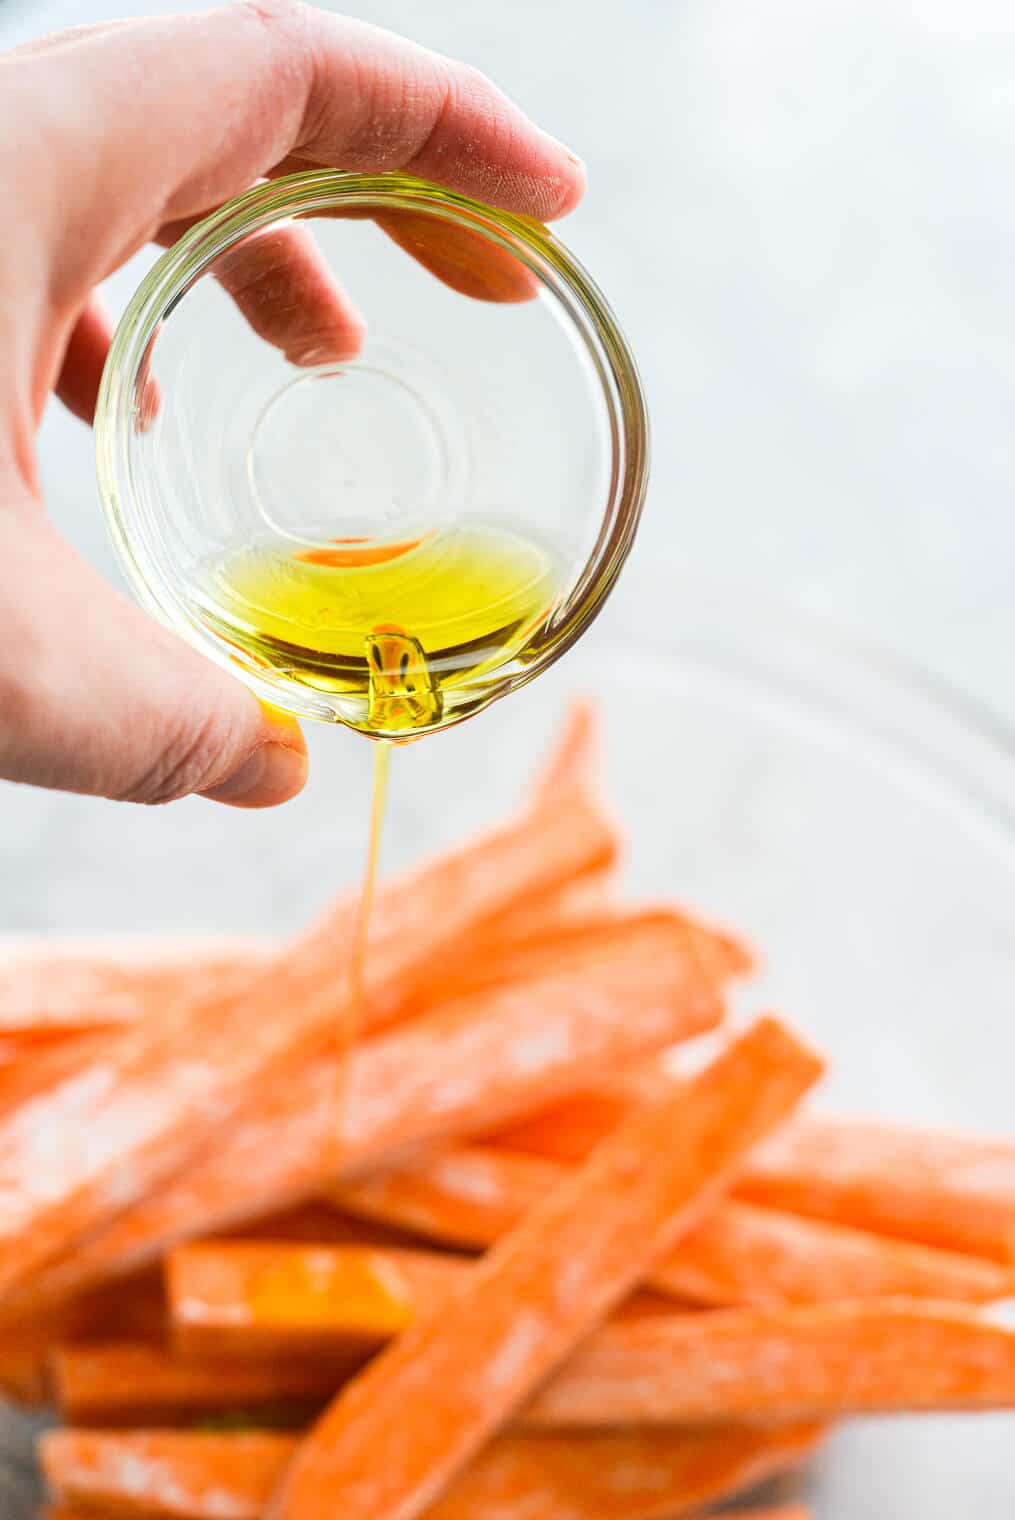 a person pouring a small clear bowl of olive oil over fry-cut sweet potatoes